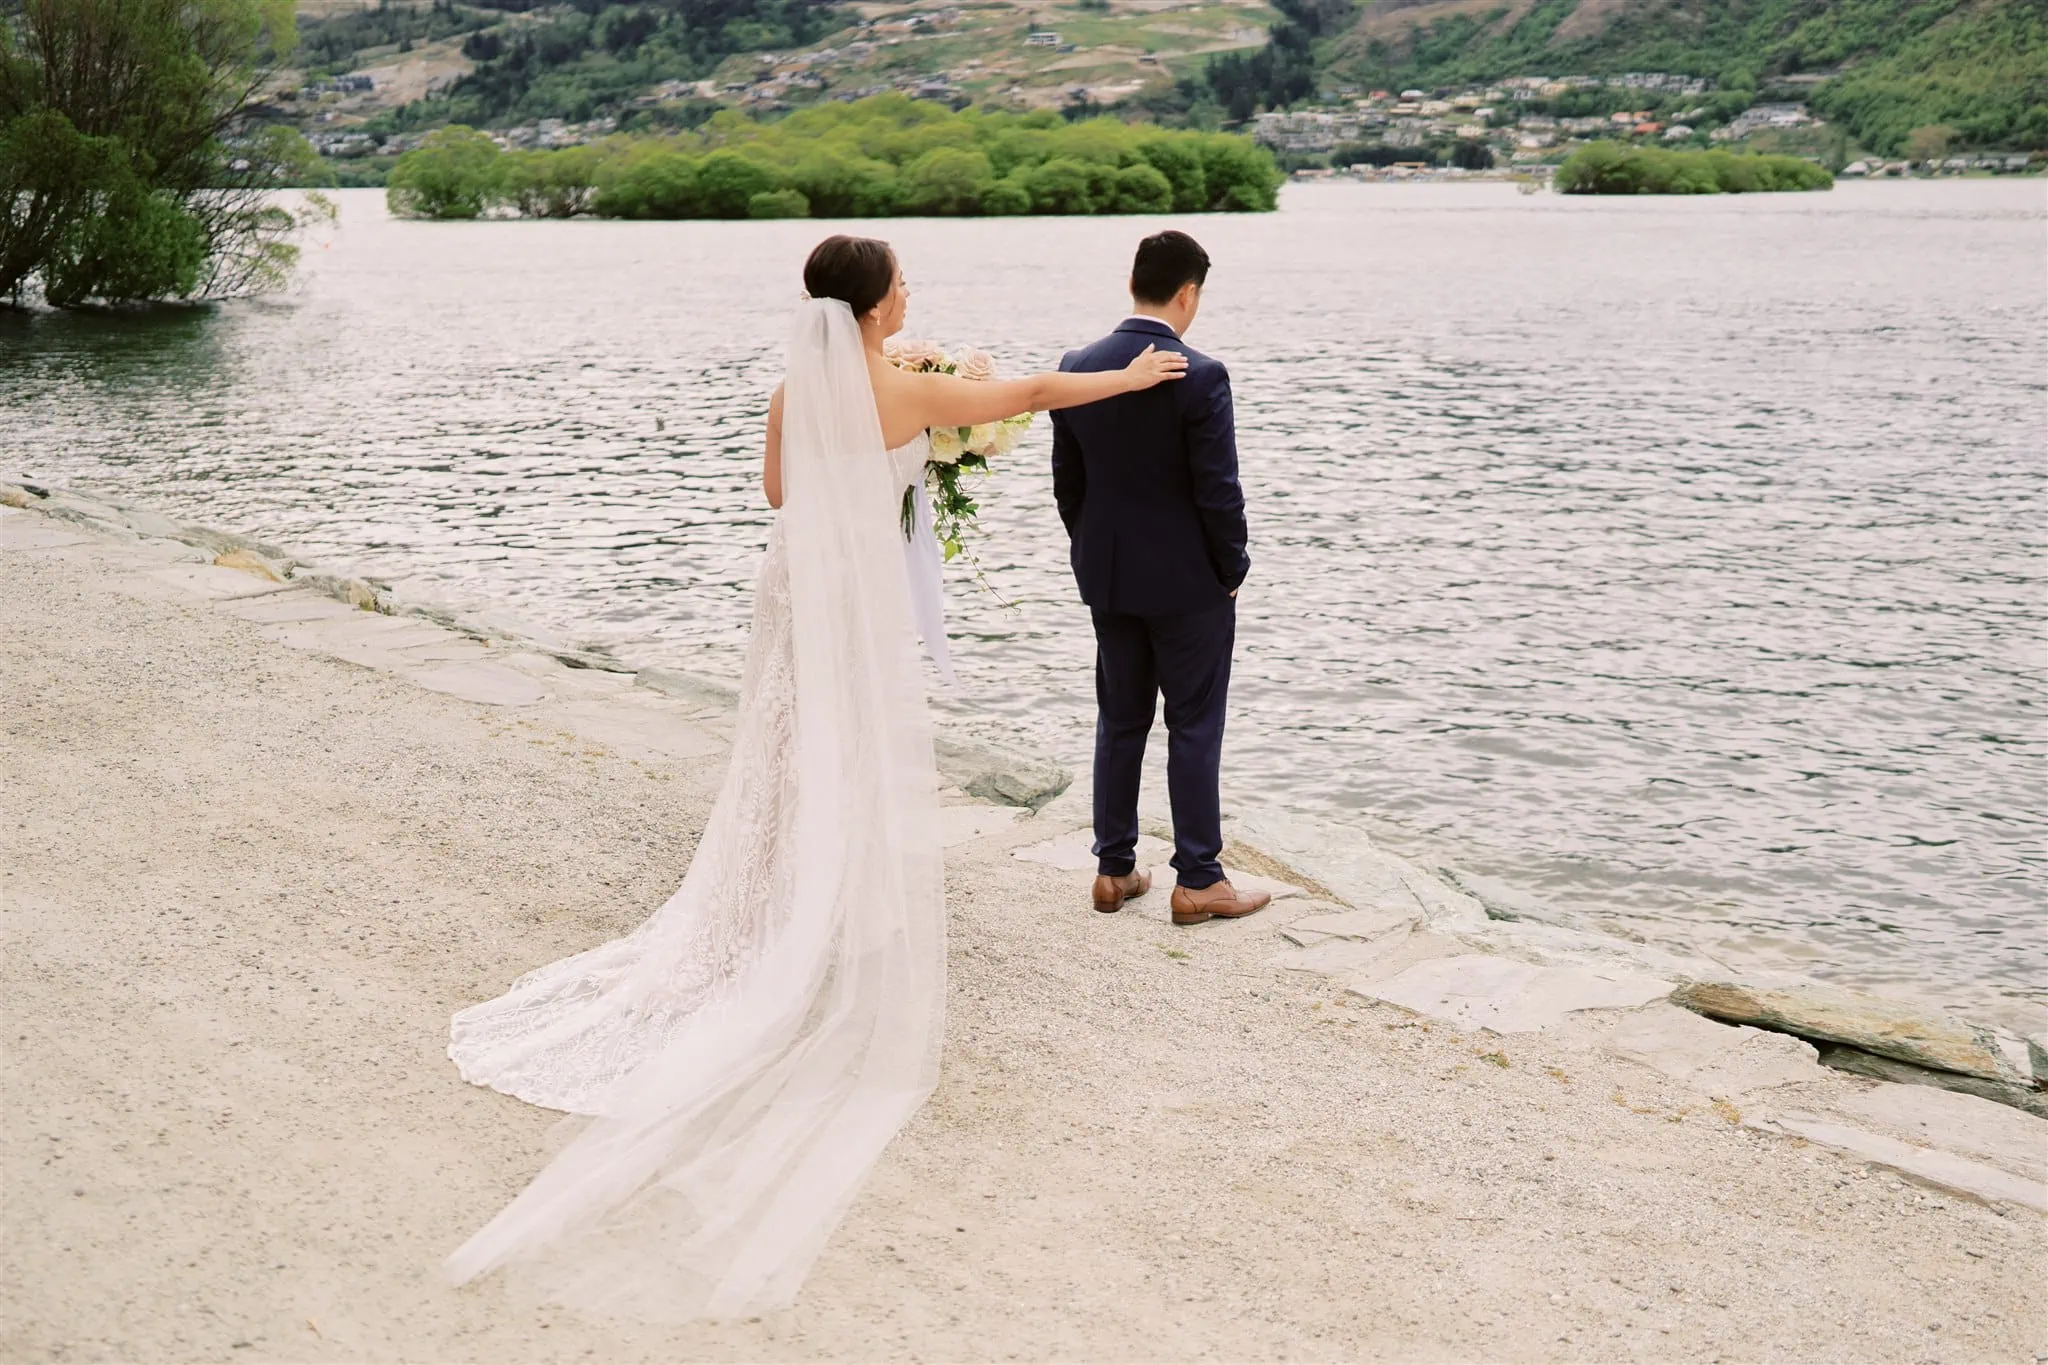 Queenstown Elopement Heli Wedding Photographer クイーンズタウン結婚式 | Cliff & Mariah's epic Queenstown elopement captured the stunning moment of a woman in a white dress holding a man in a suit.